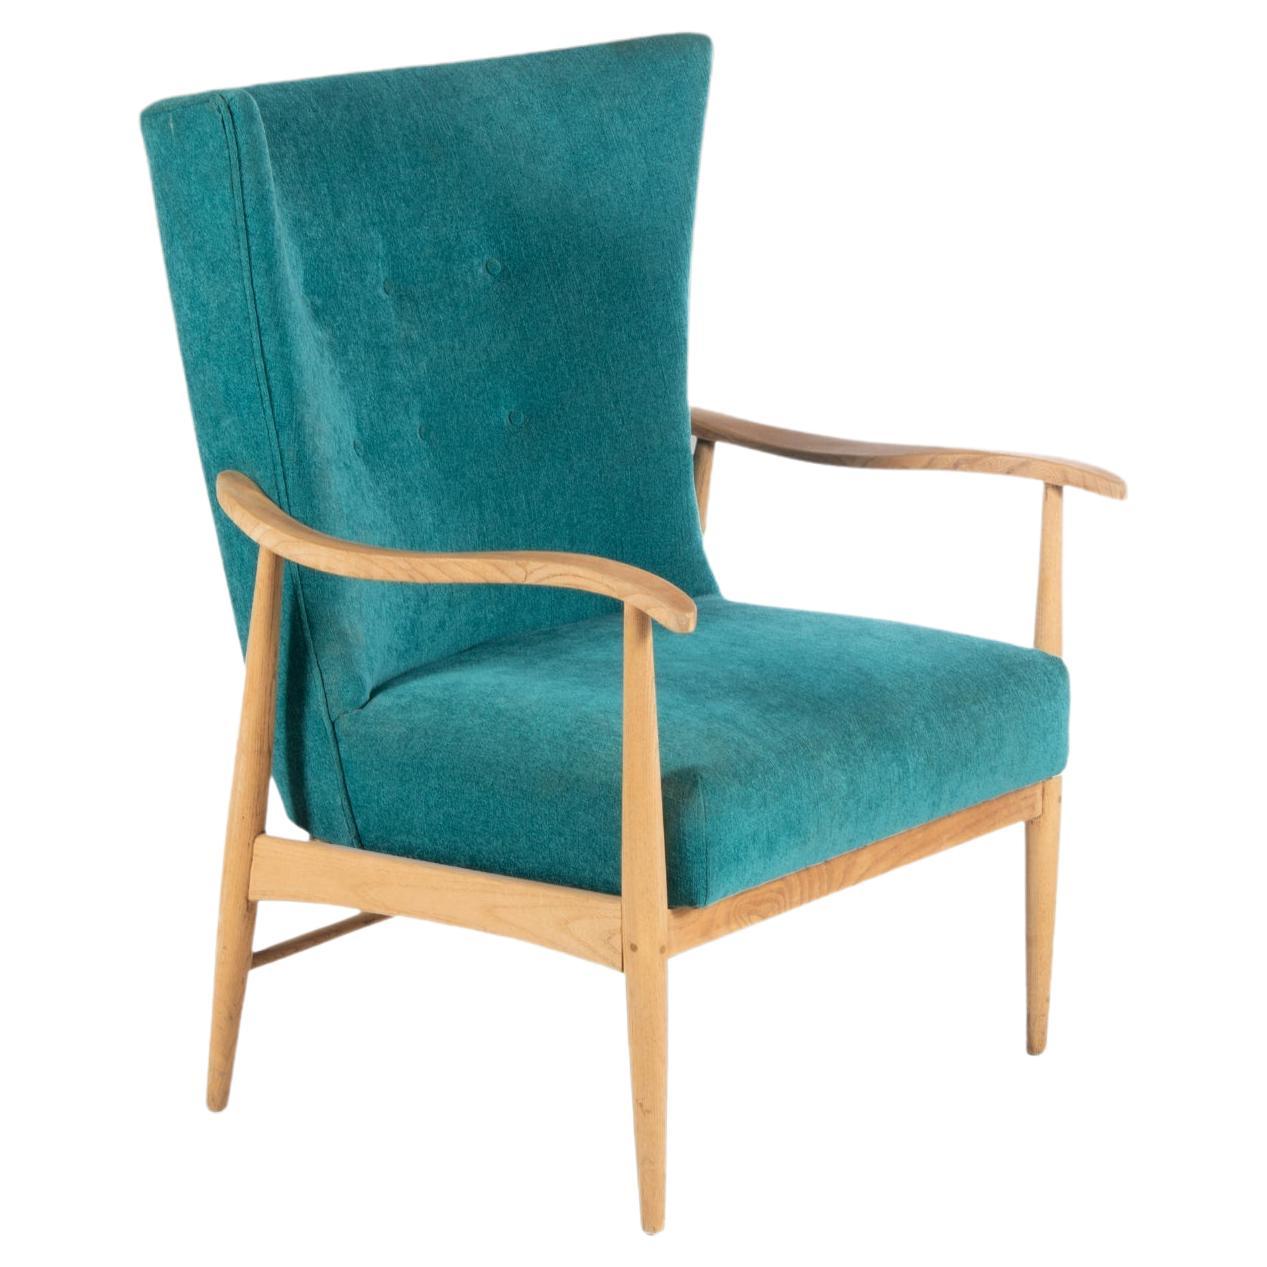 American of Martinsville High Back Lounge Chair in Original Seafoam Fabric, 1960 For Sale